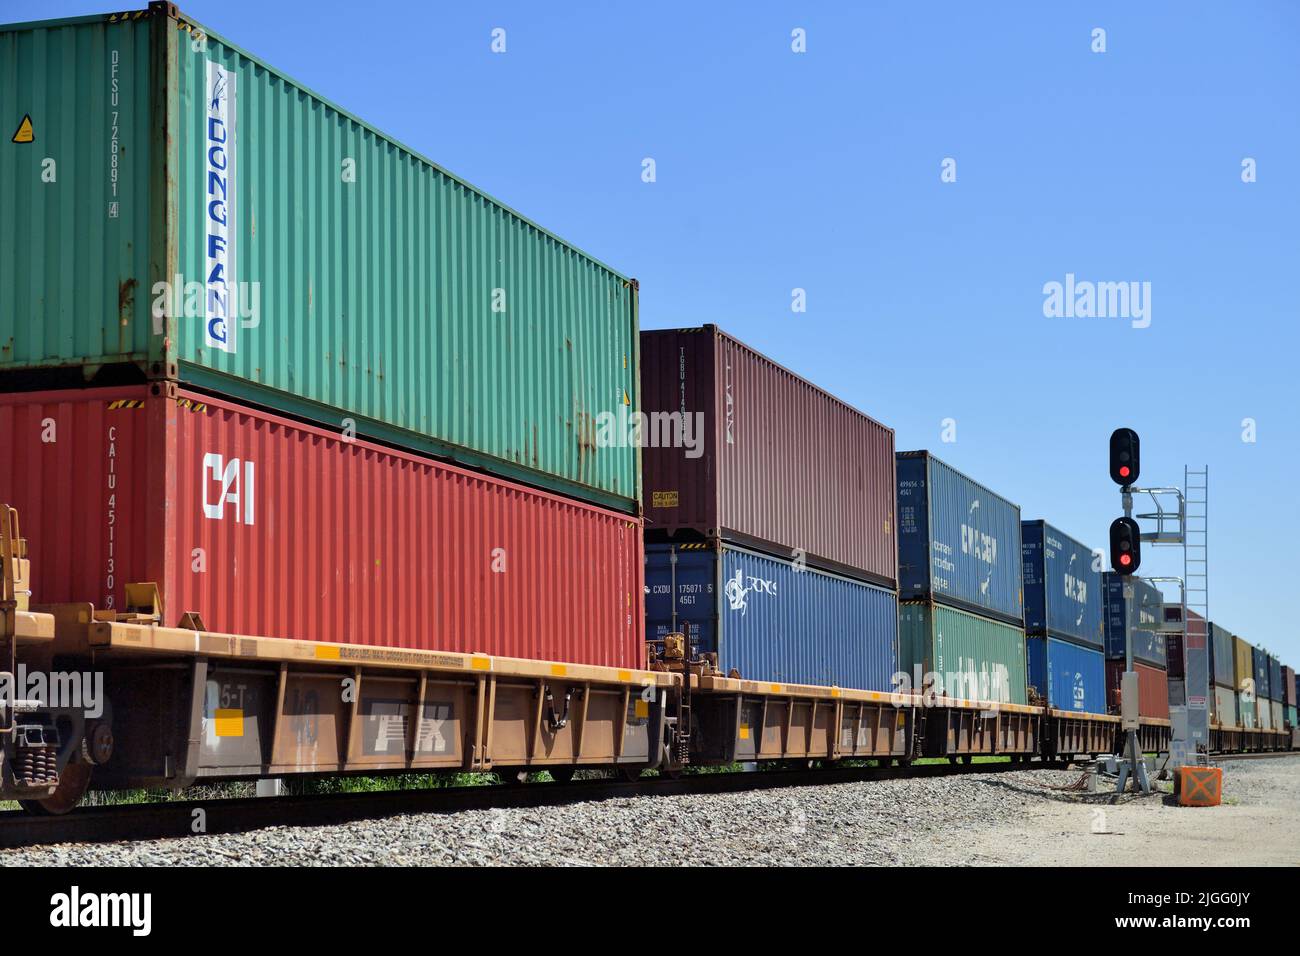 Dundee, Illinois, USA. A Canadian National Railway intermodal freight train through a passing siding in a rural section of northeastern Illinois. Stock Photo